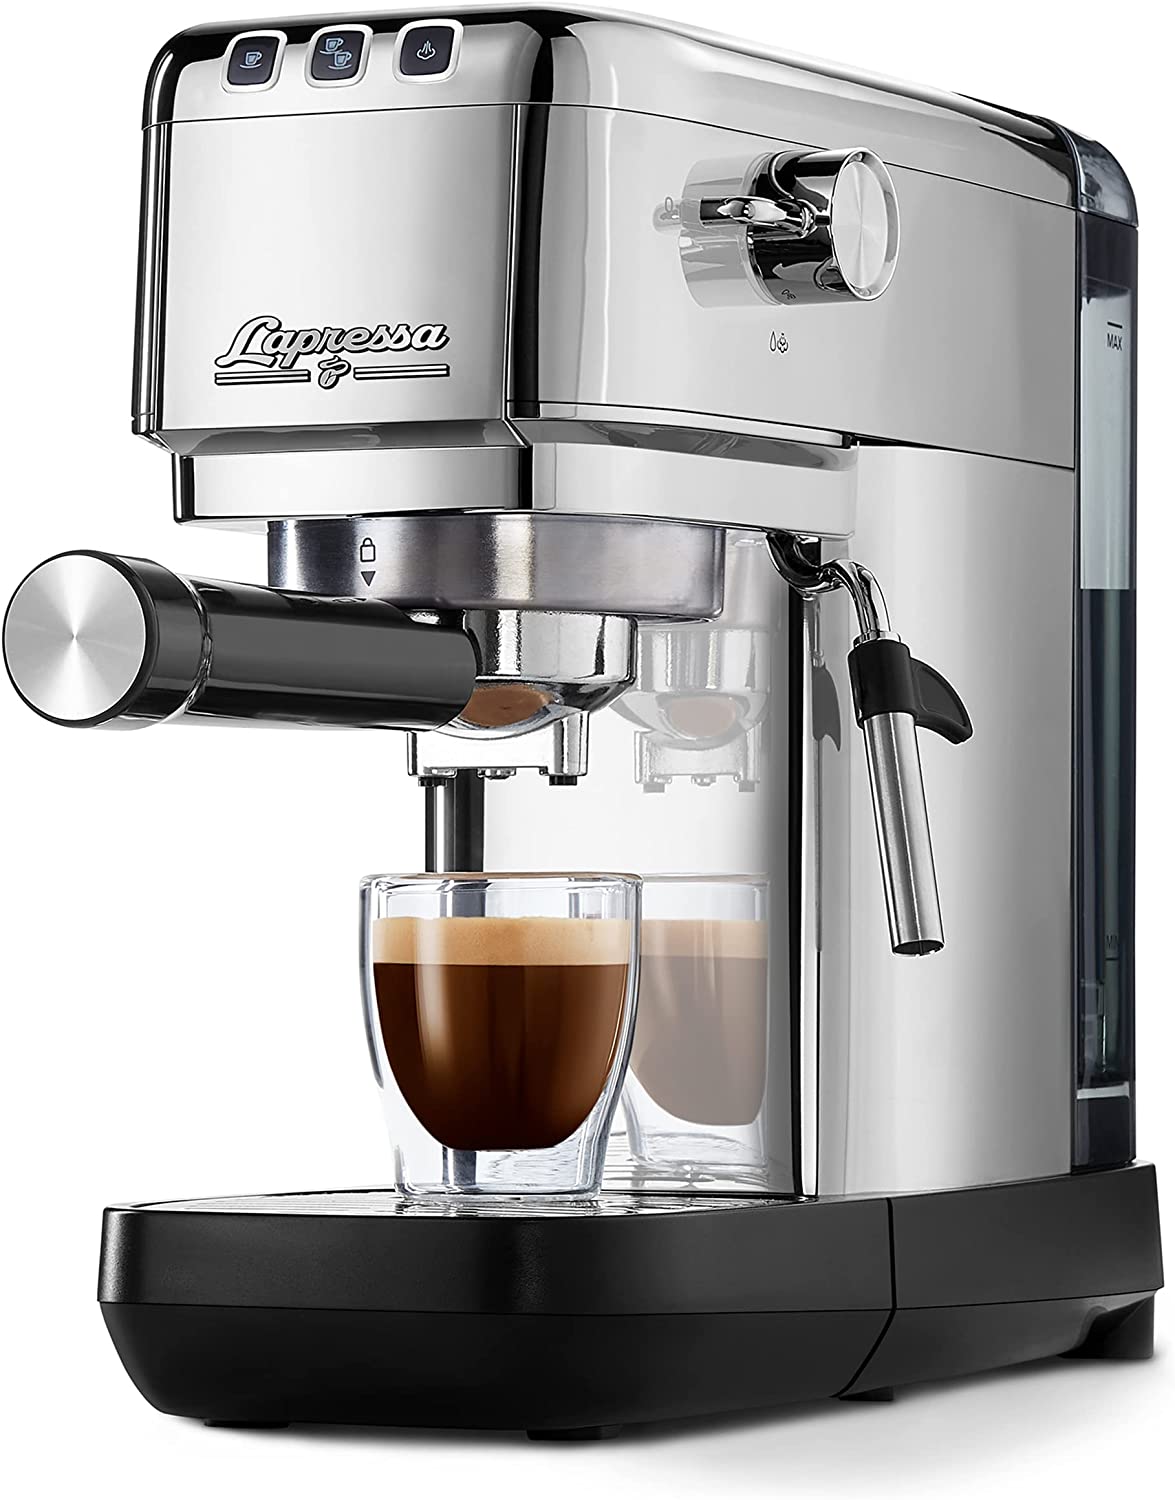 Tchibo Lapressa Filter Espresso Machine with Double Spout and Milk Frothing Nozzle (15 bar, 980 ml Water Tank), Includes Two Double-Walled Strainers, for Espresso and Milk Foam, Stainless Steel